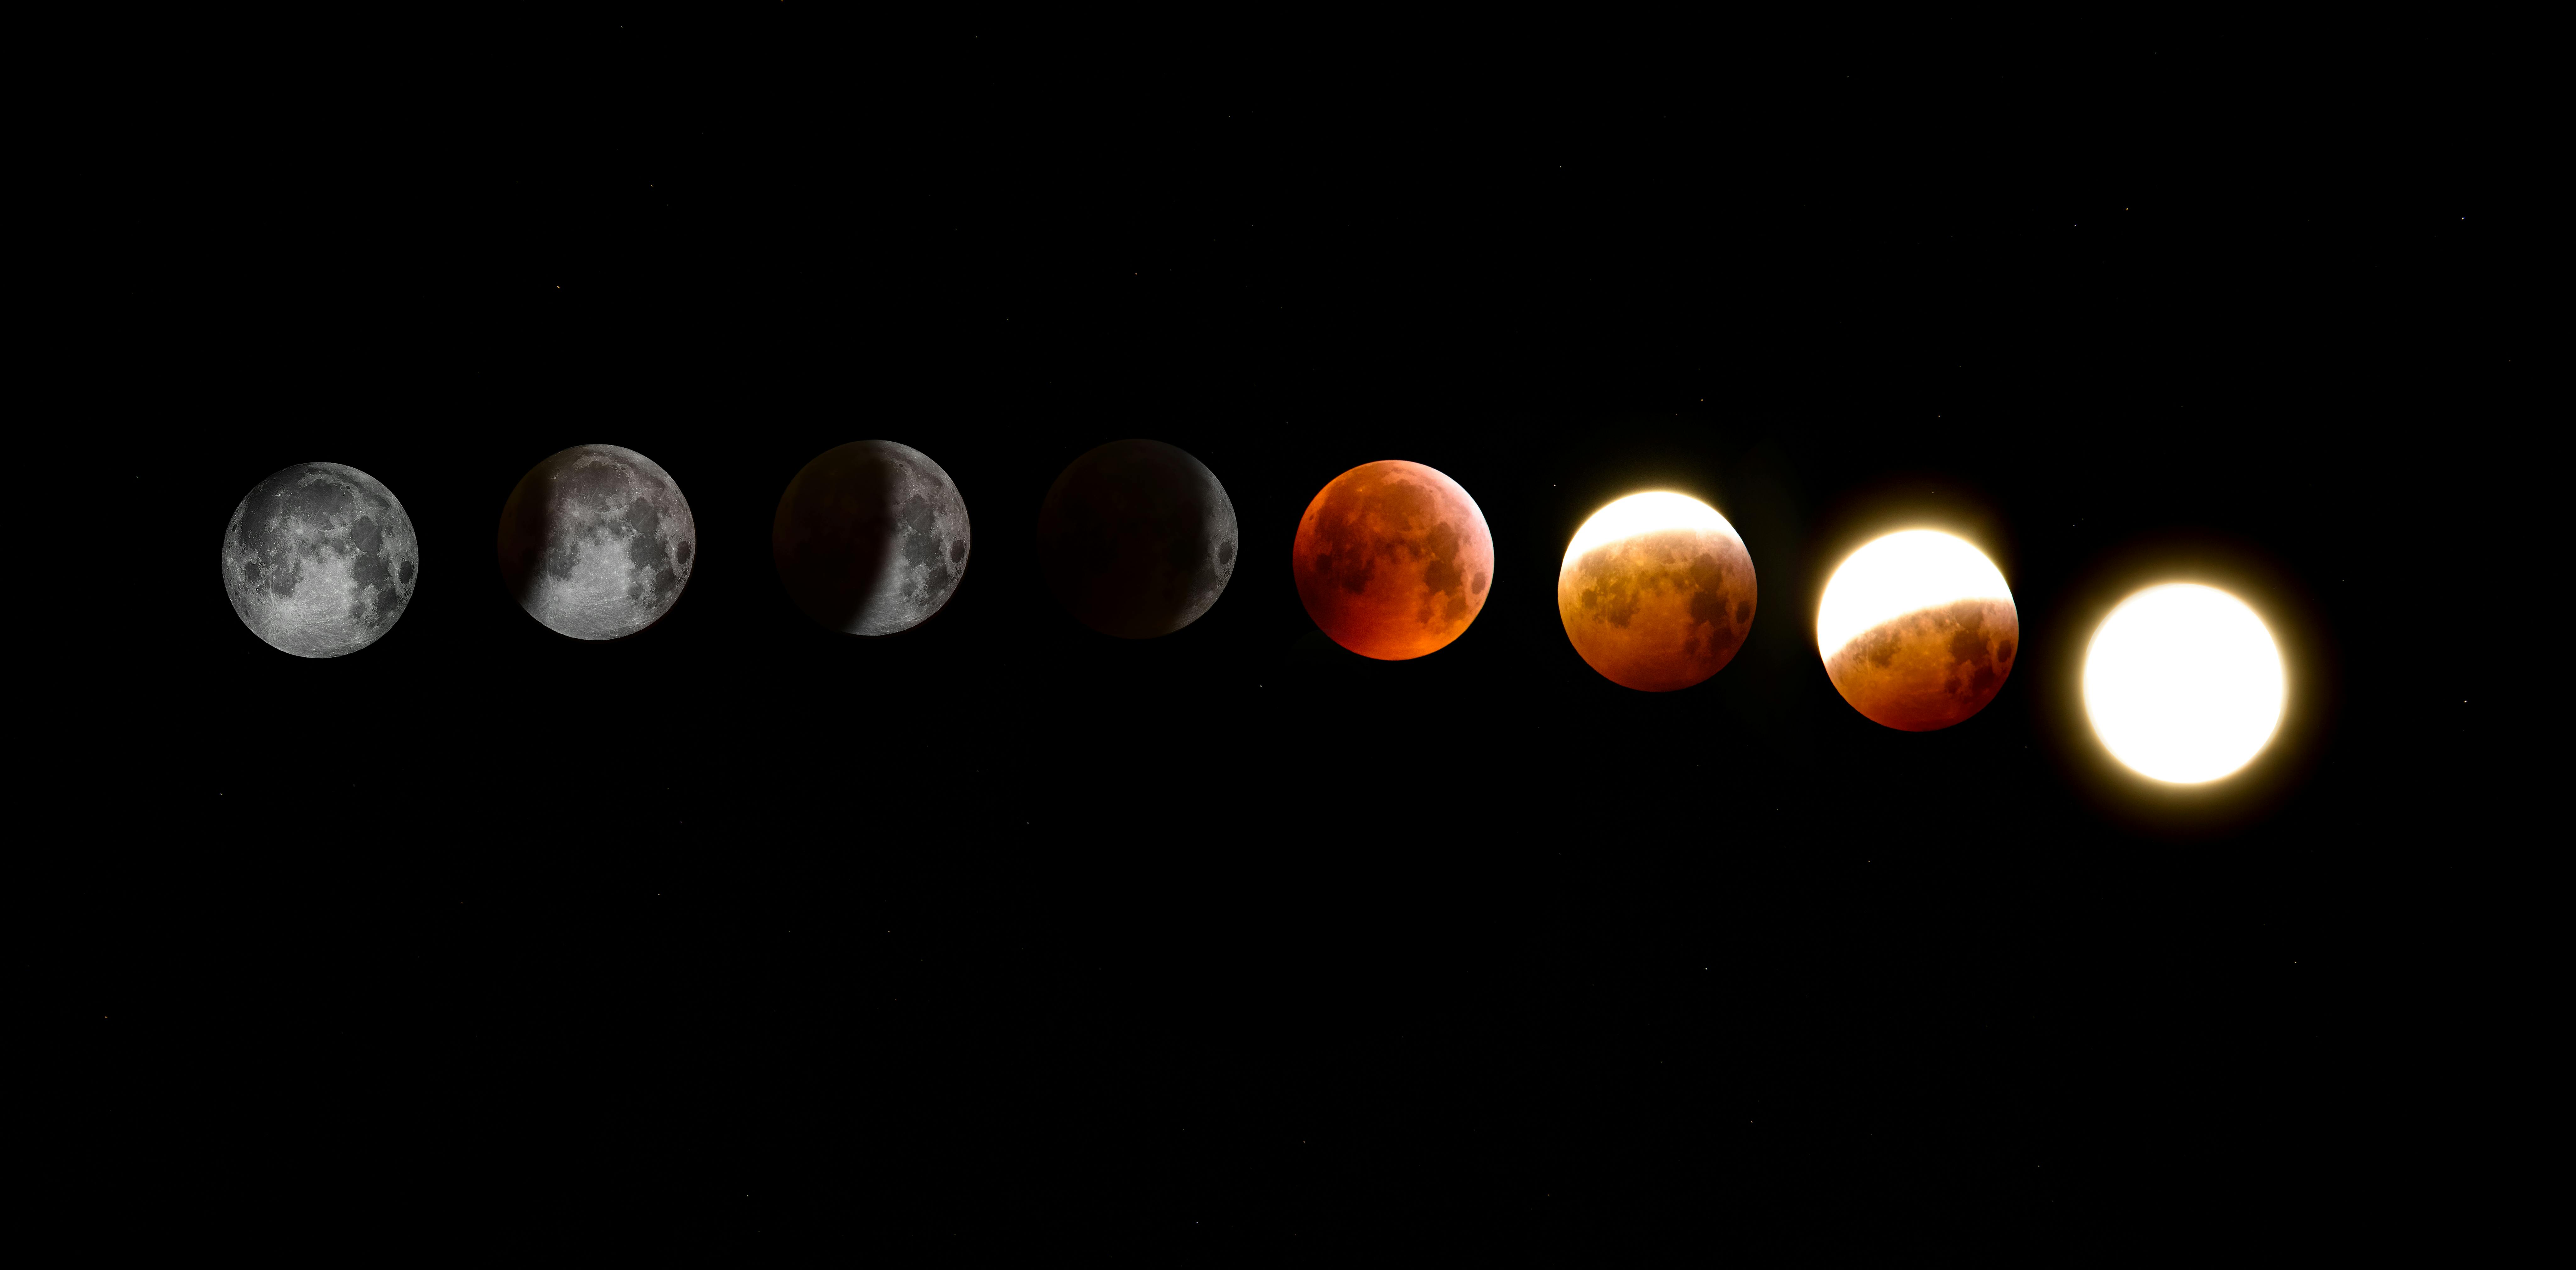 phases-of-the-moon-free-stock-photo